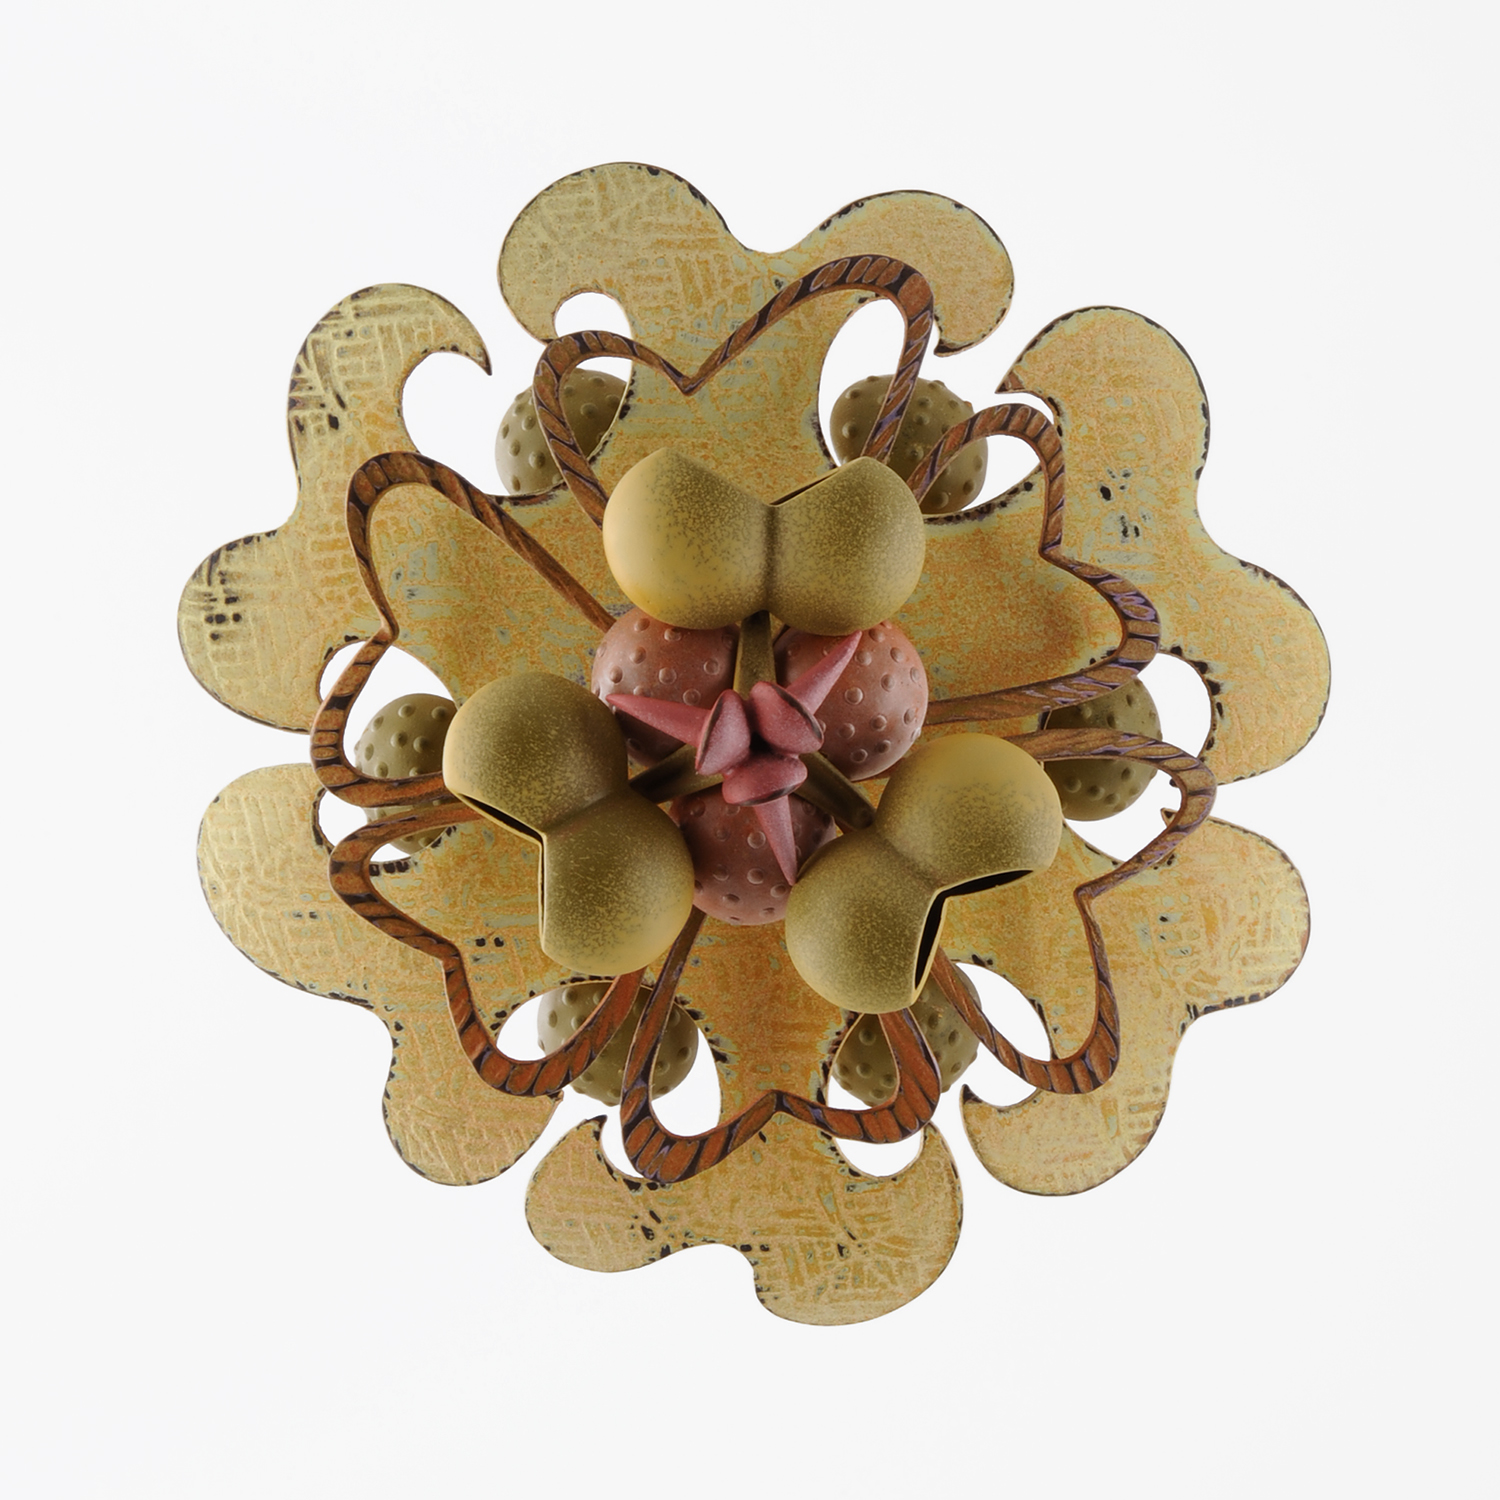 Rosette Brooch 40-16  |  2016  |  bronze, acrylic lacquer  |  3.75 x 3.75 x 1.5 inches